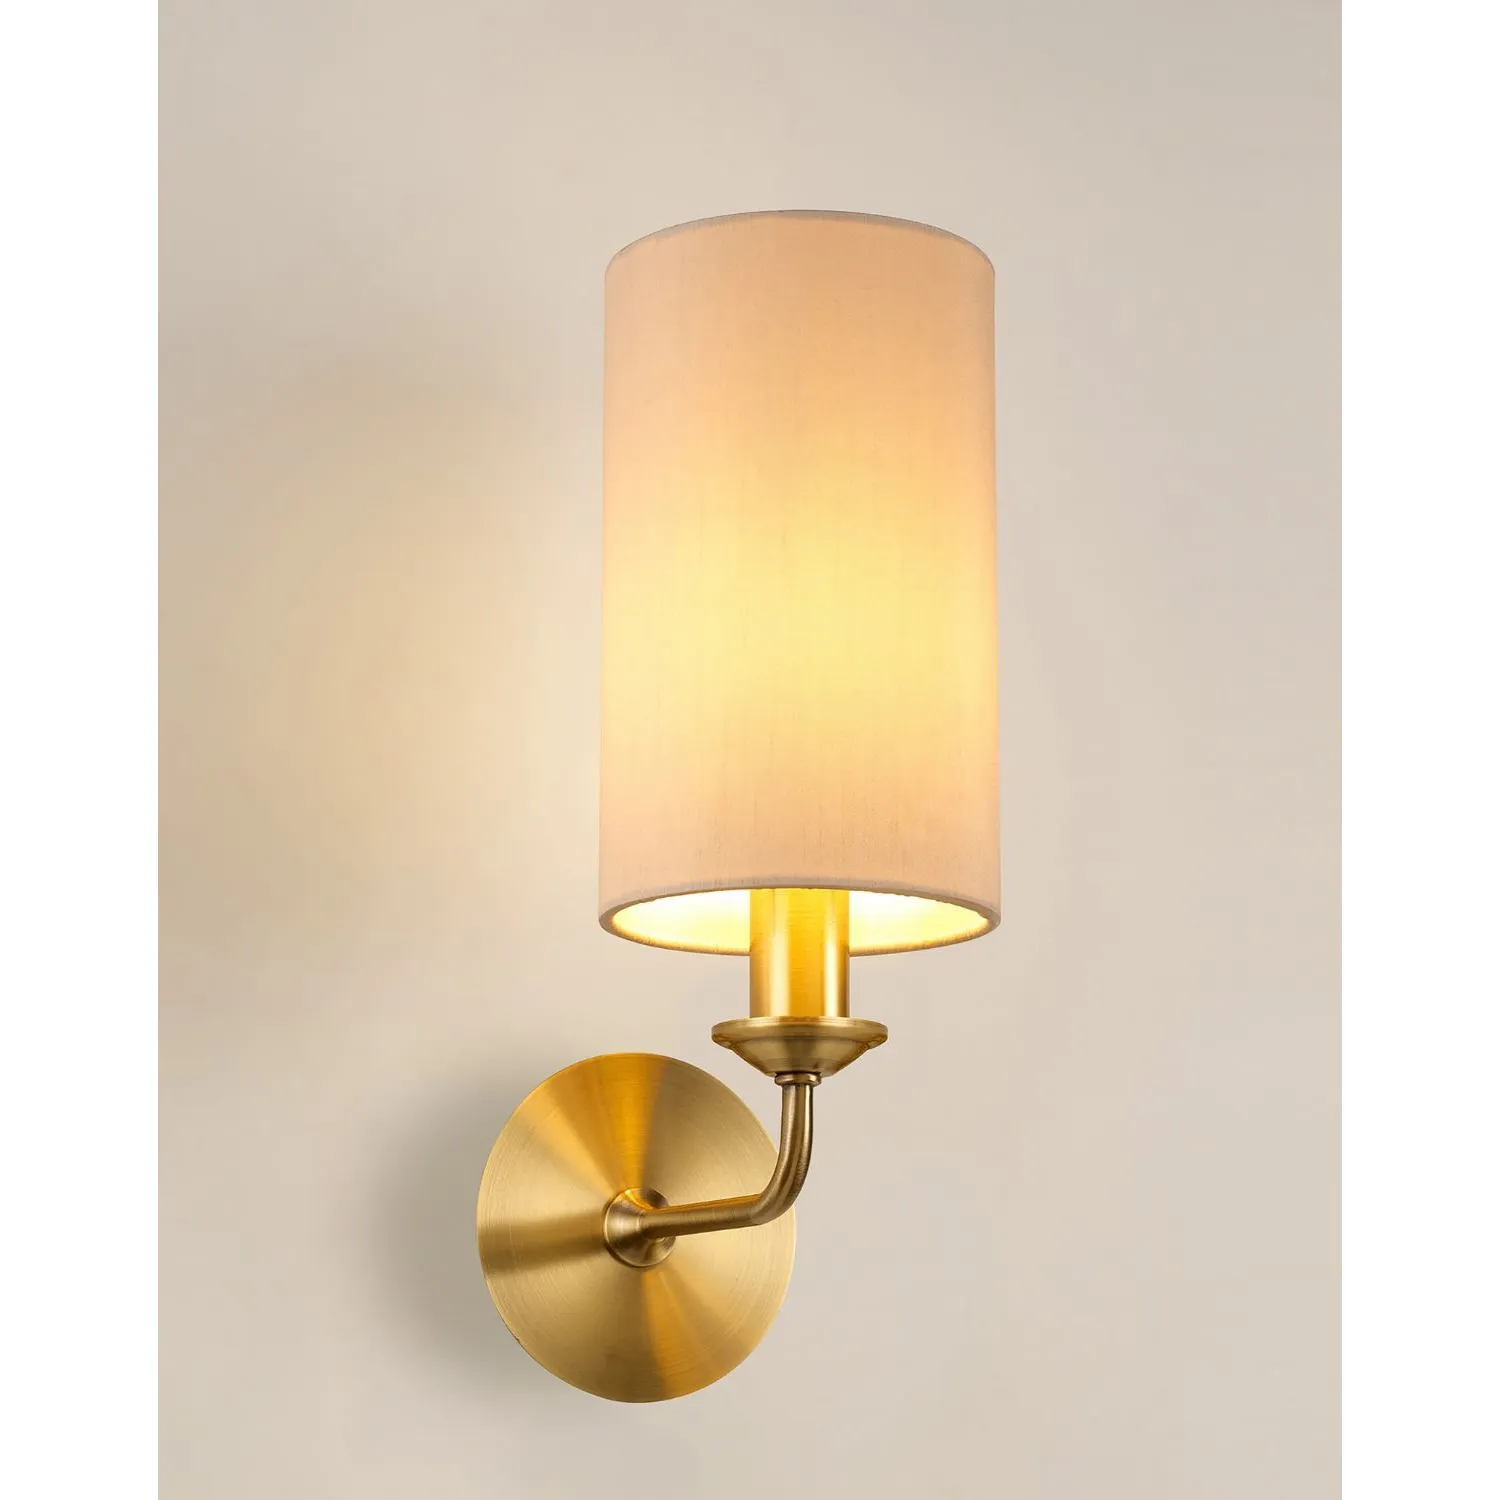 Banyan 1 Light Switched Wall Lamp, E14 Antique Brass c w 120mm Dual Faux Silk Shade, Nude Beige Moonlight